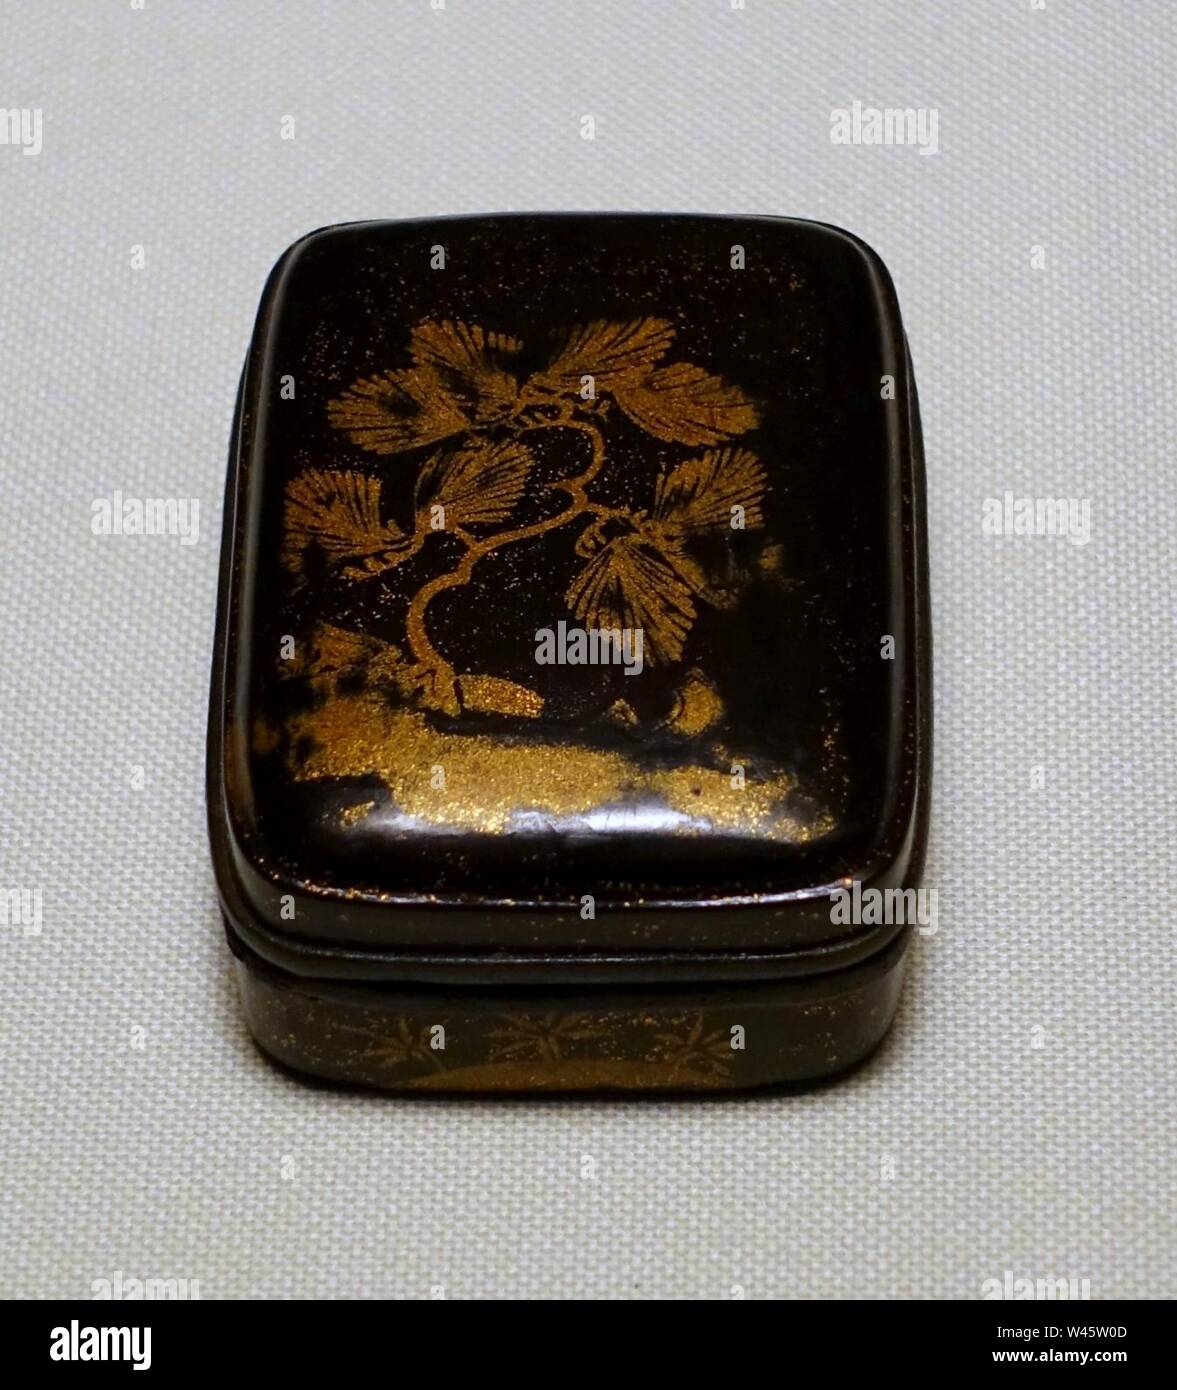 Container for tooth dye with pine tree design, Muromachi period, 1400s AD, maki-e lacquer - Stock Photo